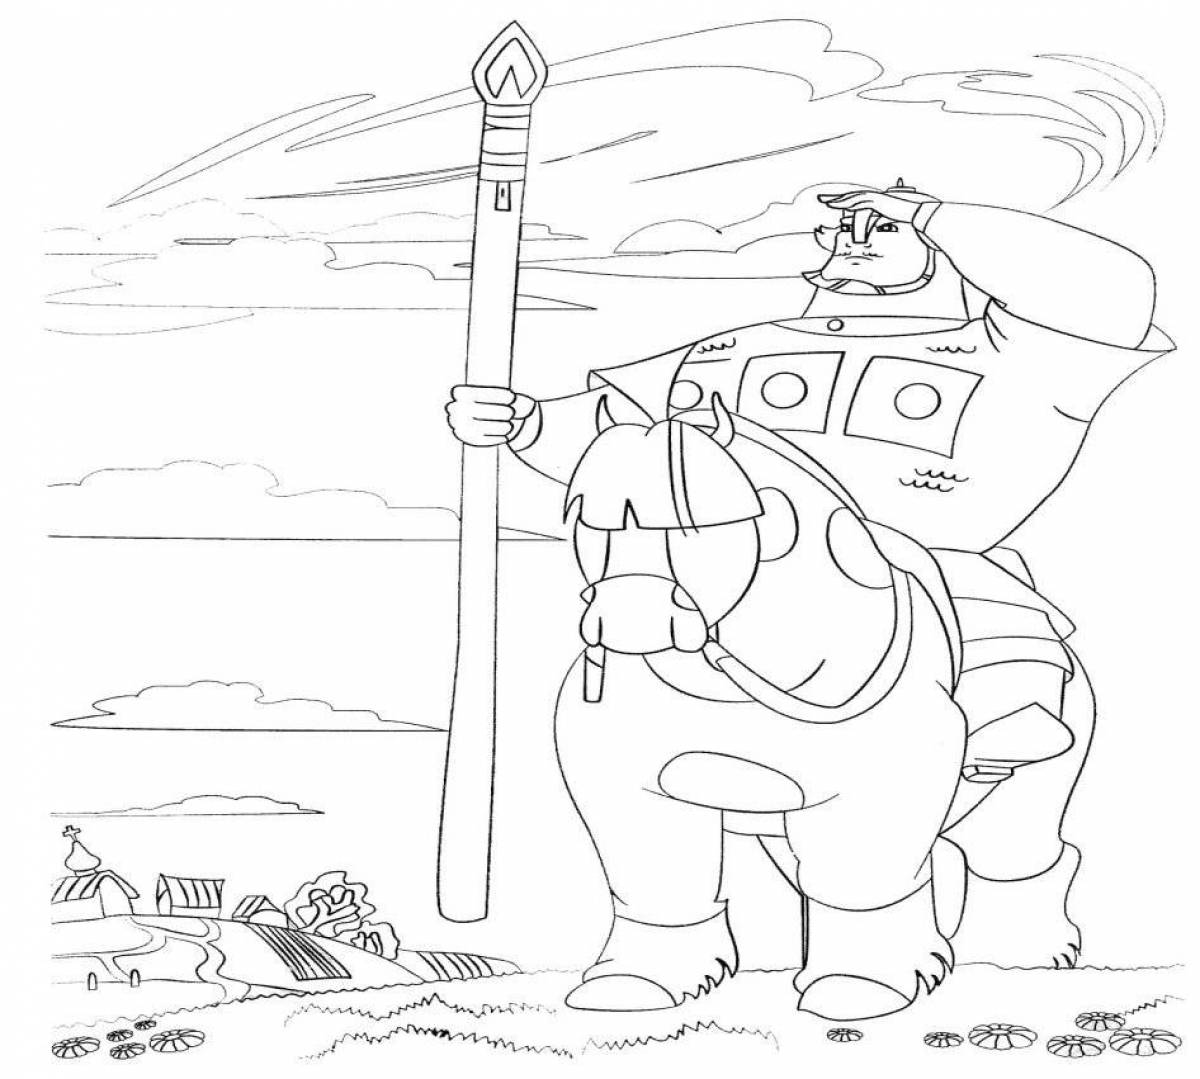 Crazy Nikitich coloring page